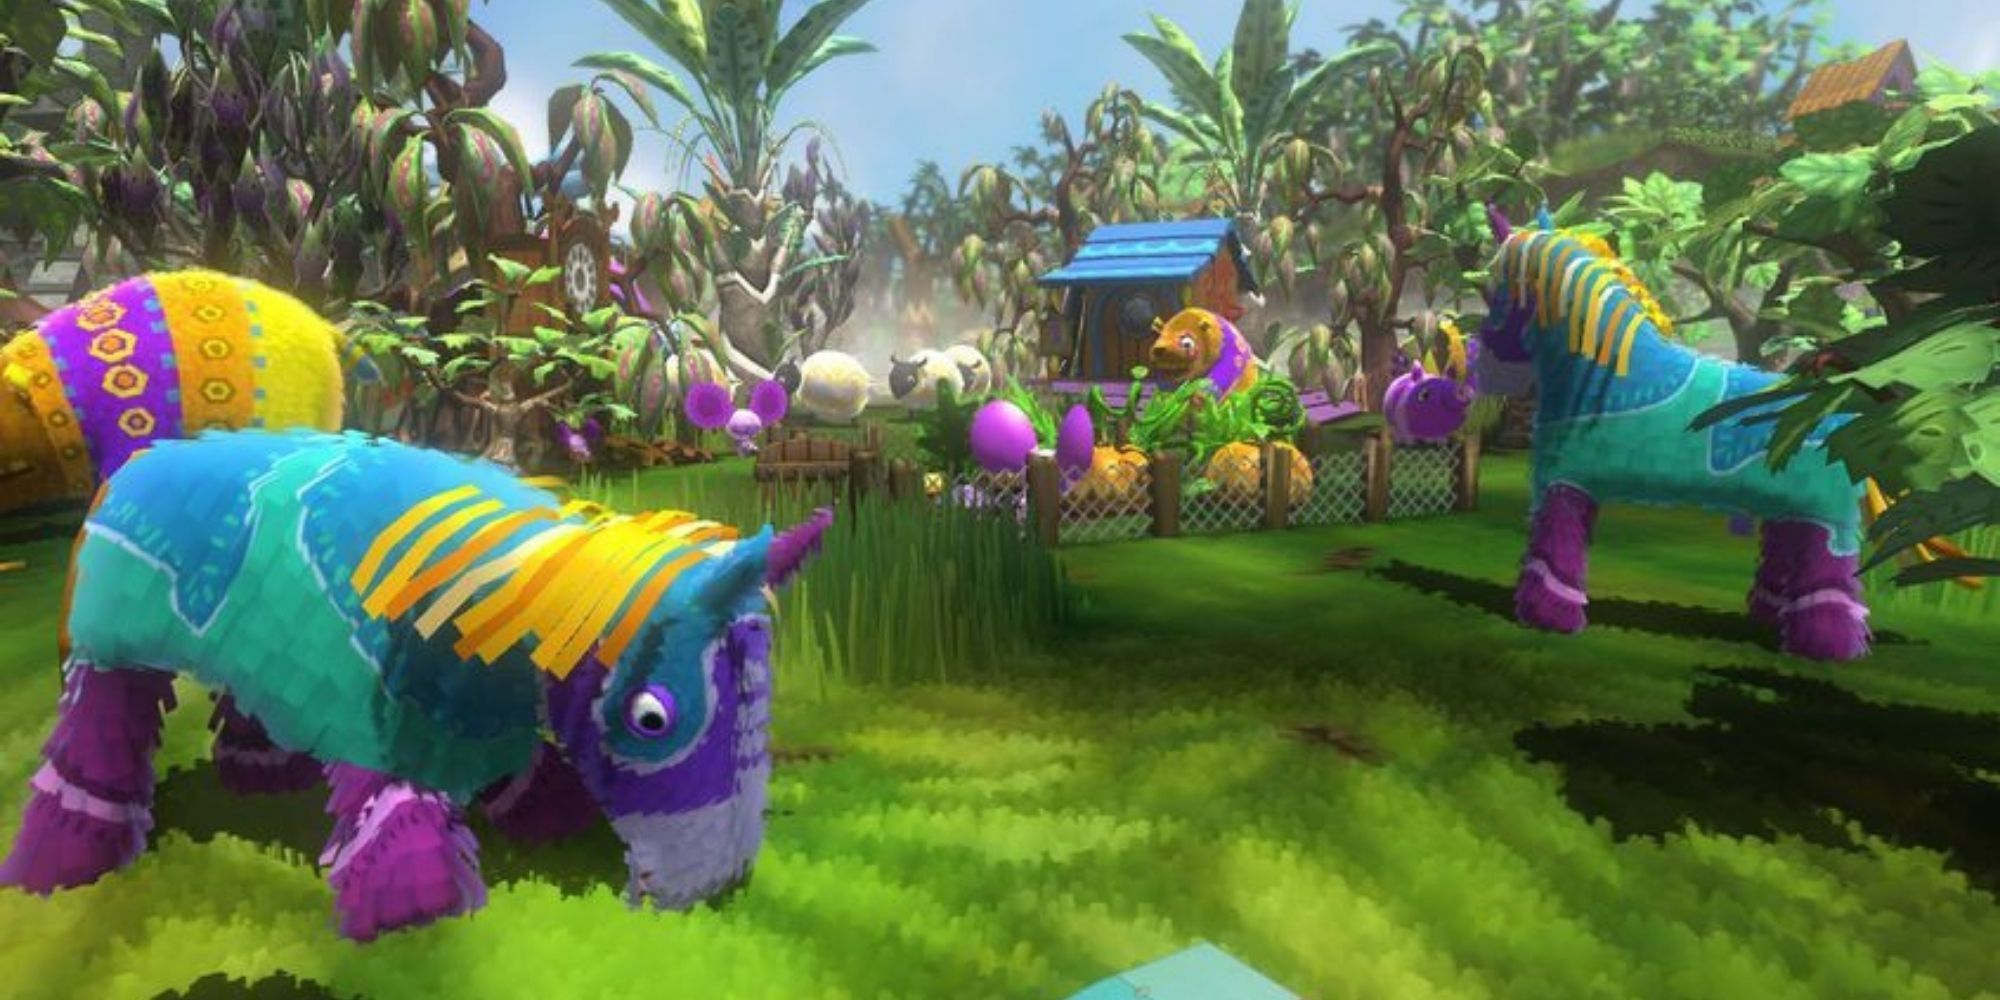 Best Casual Xbox 360 Games - Viva Pinata - A Green Garden Filled With Pinata Horses